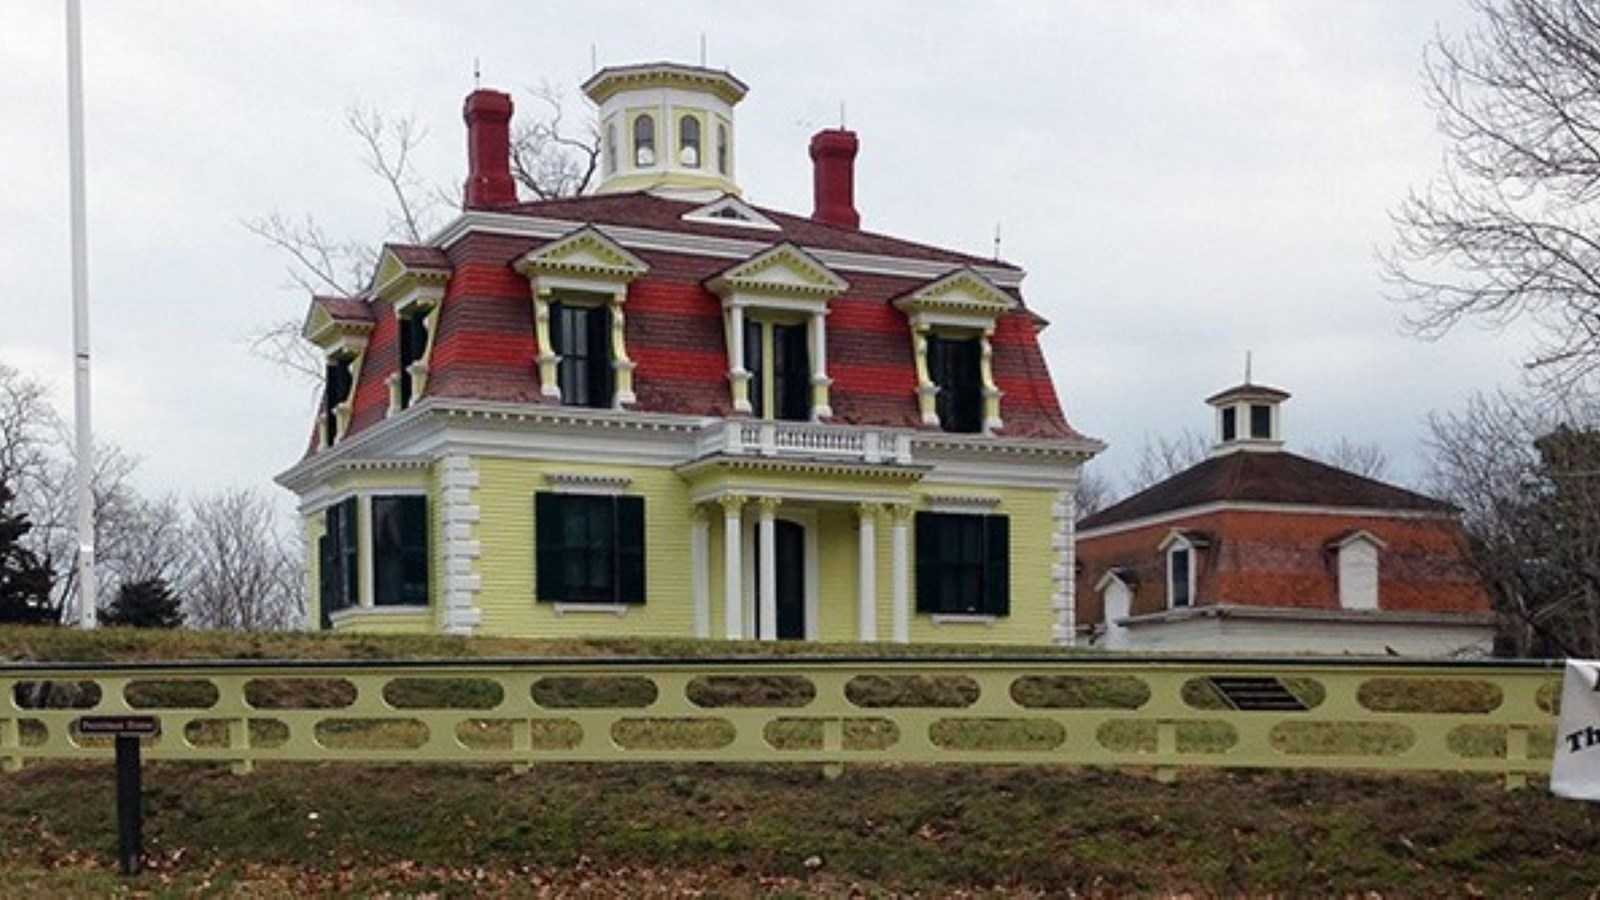 Yellow Victorian-style home with brown and red accents. Property surrounded by yellow fence.